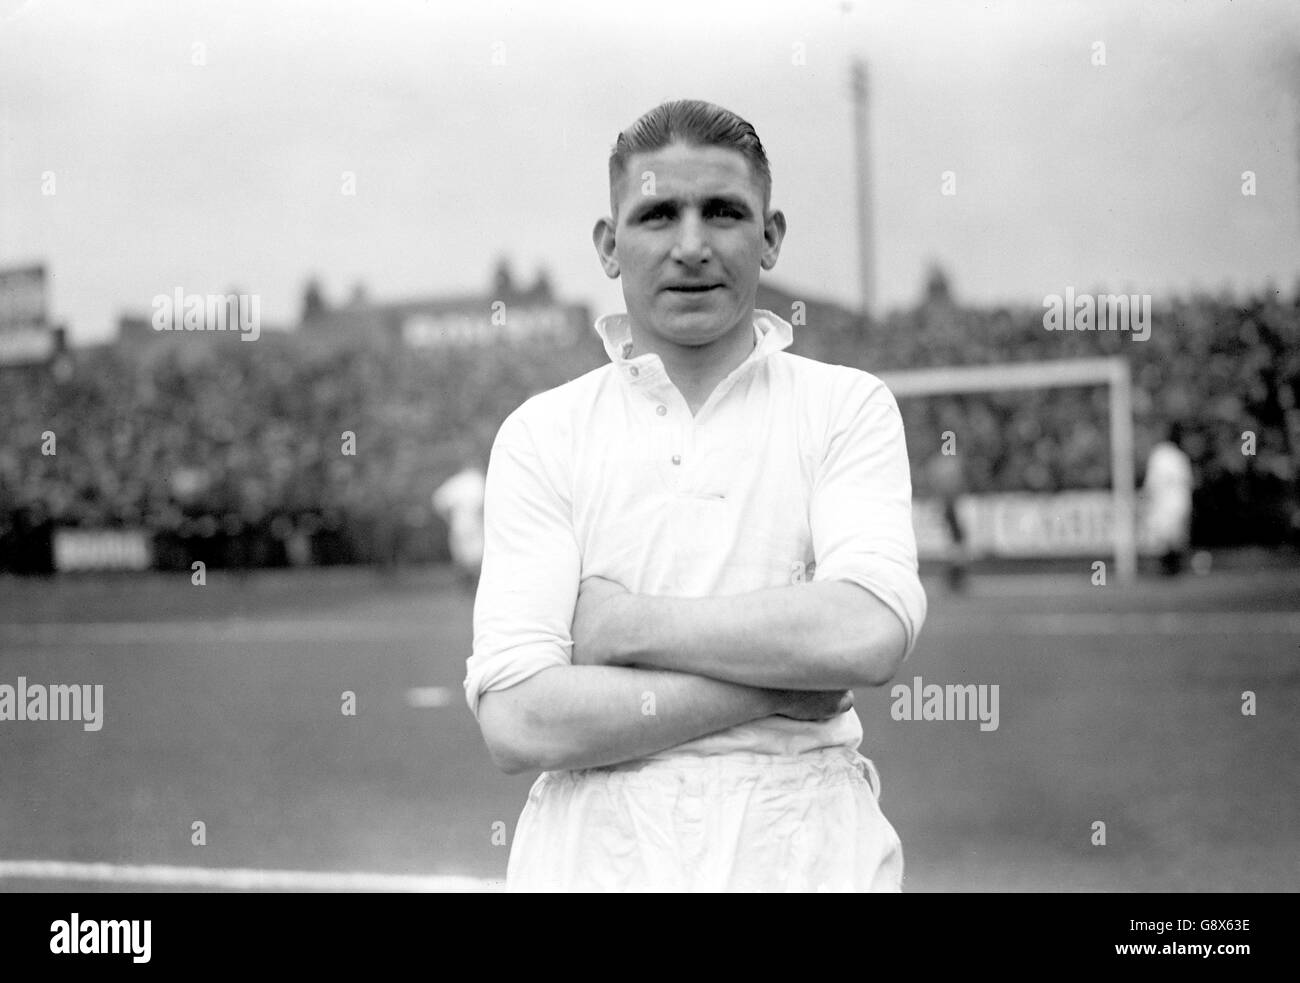 Swansea FC Photocall. Swansea Town FC giocatore Miller. Foto Stock